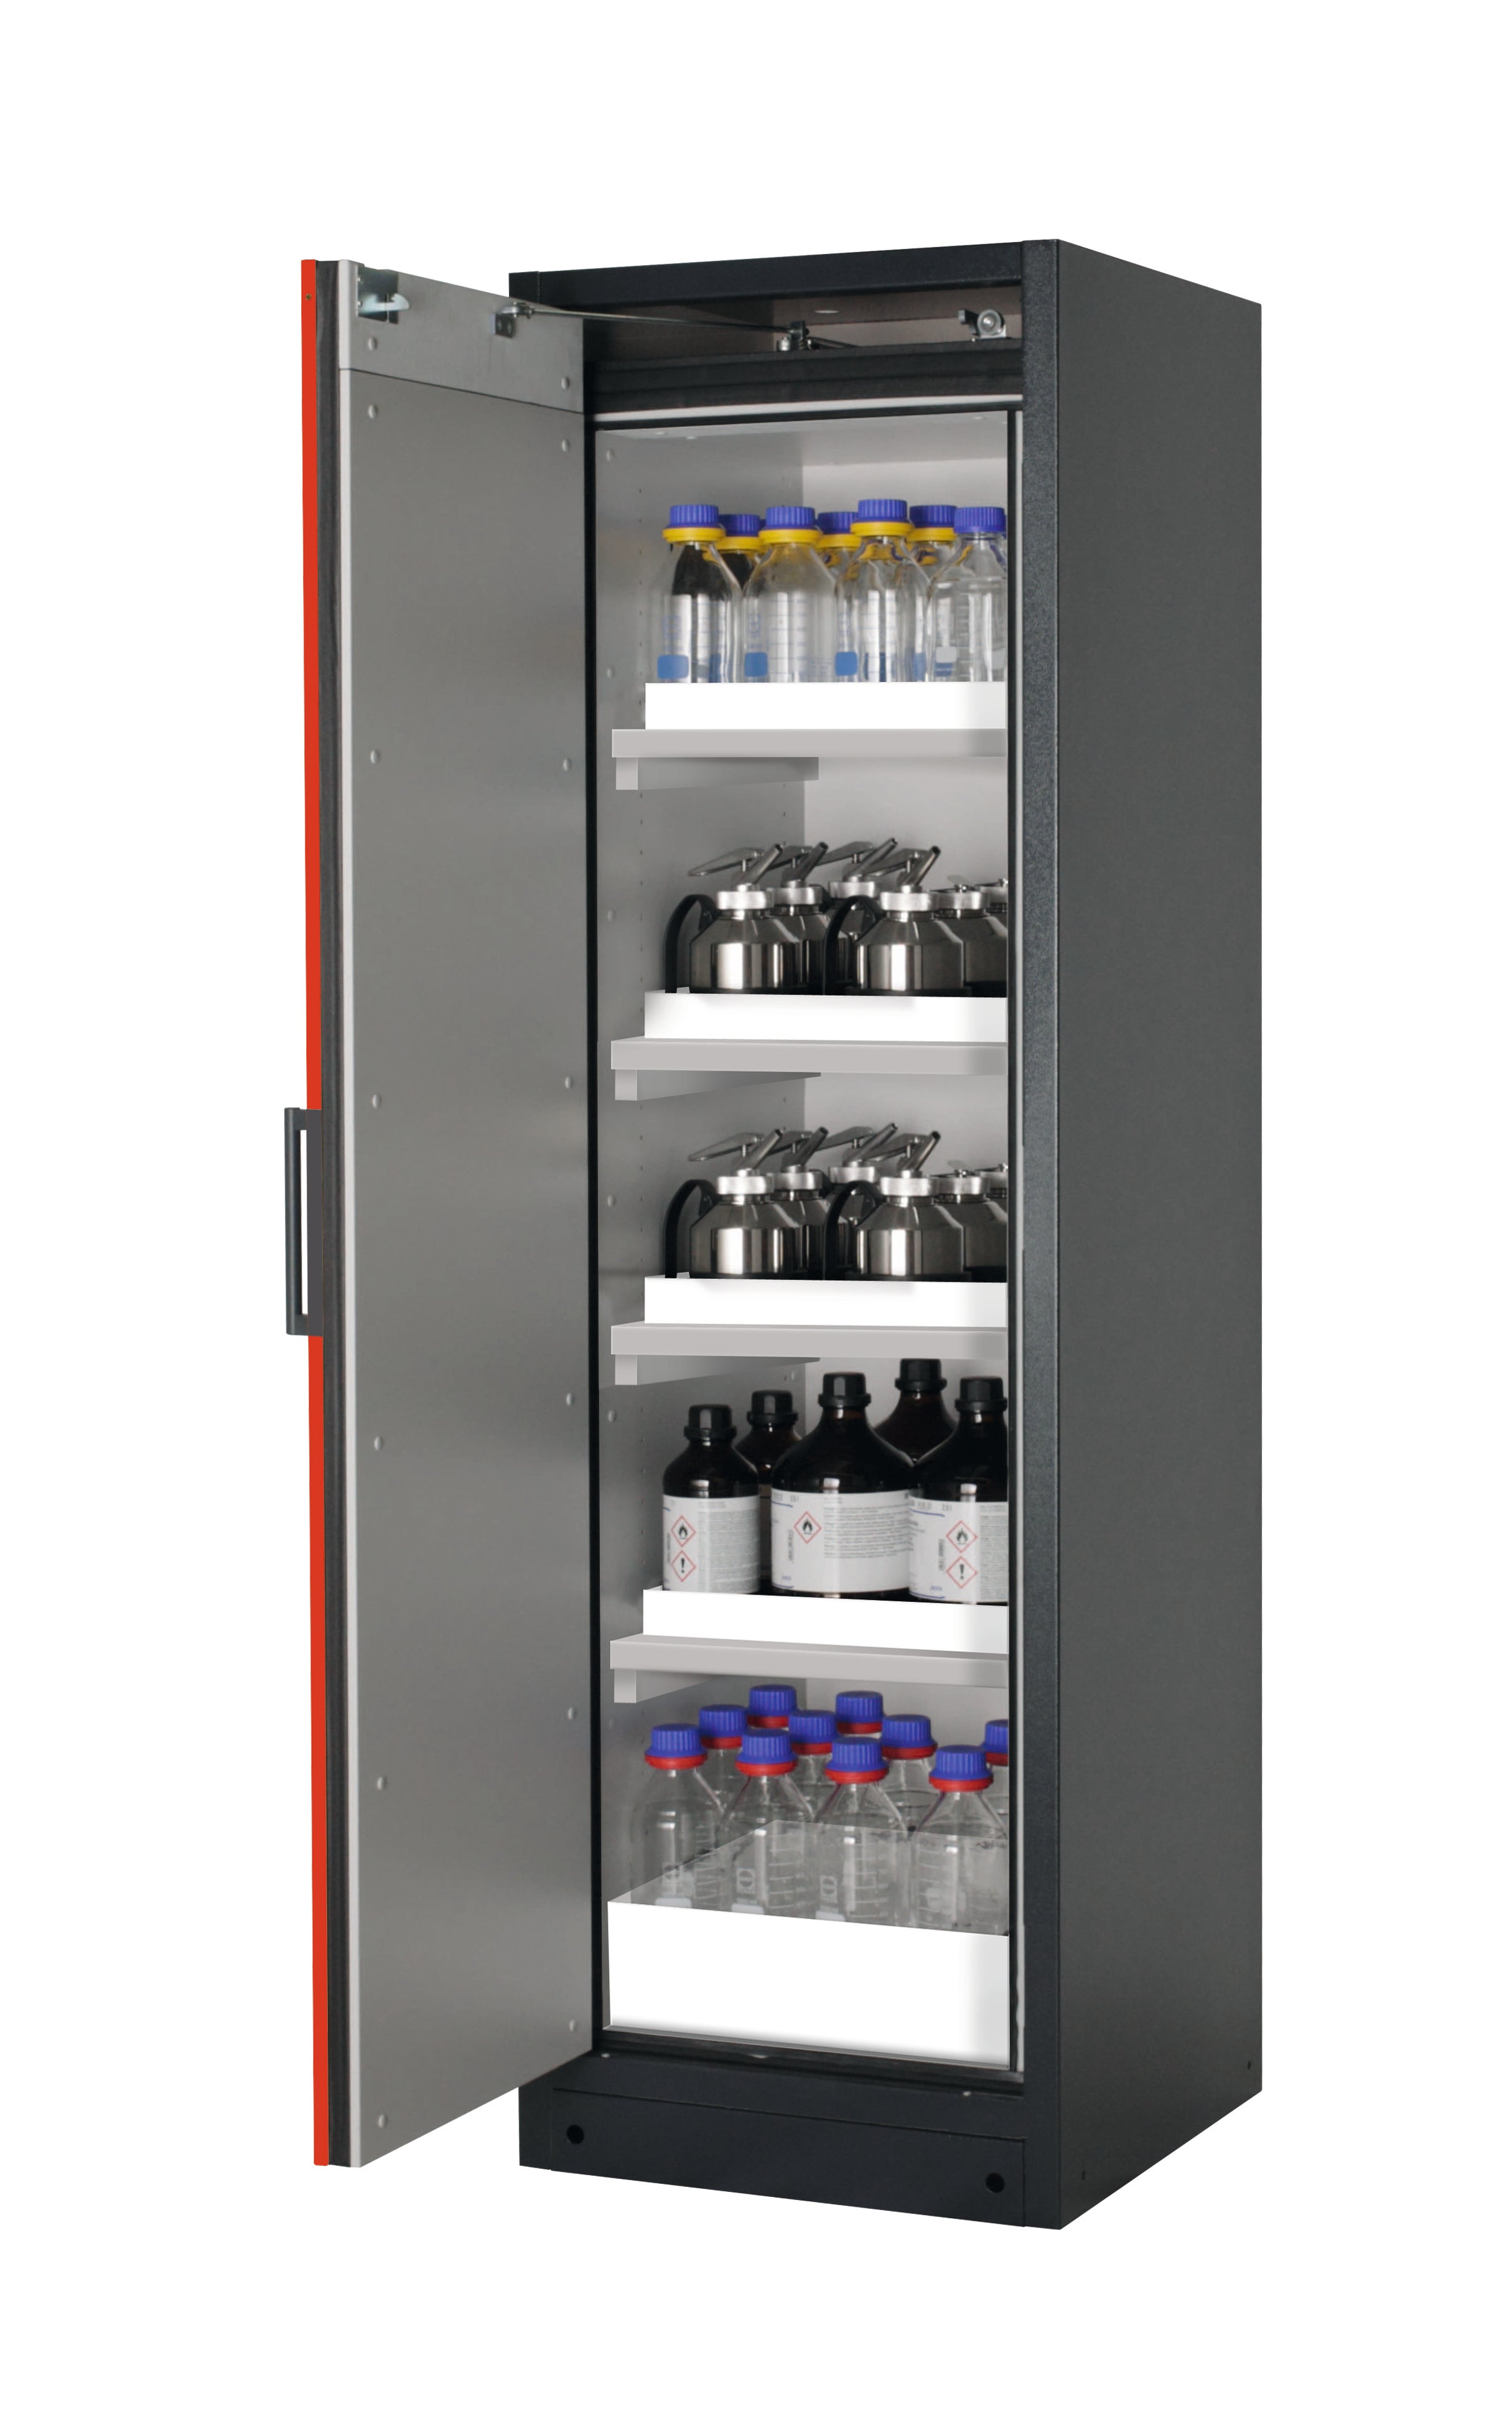 Type 90 safety storage cabinet Q-PEGASUS-90 model Q90.195.060.WDAC in traffic red RAL 3020 with 4x tray shelf (standard) (polypropylene),